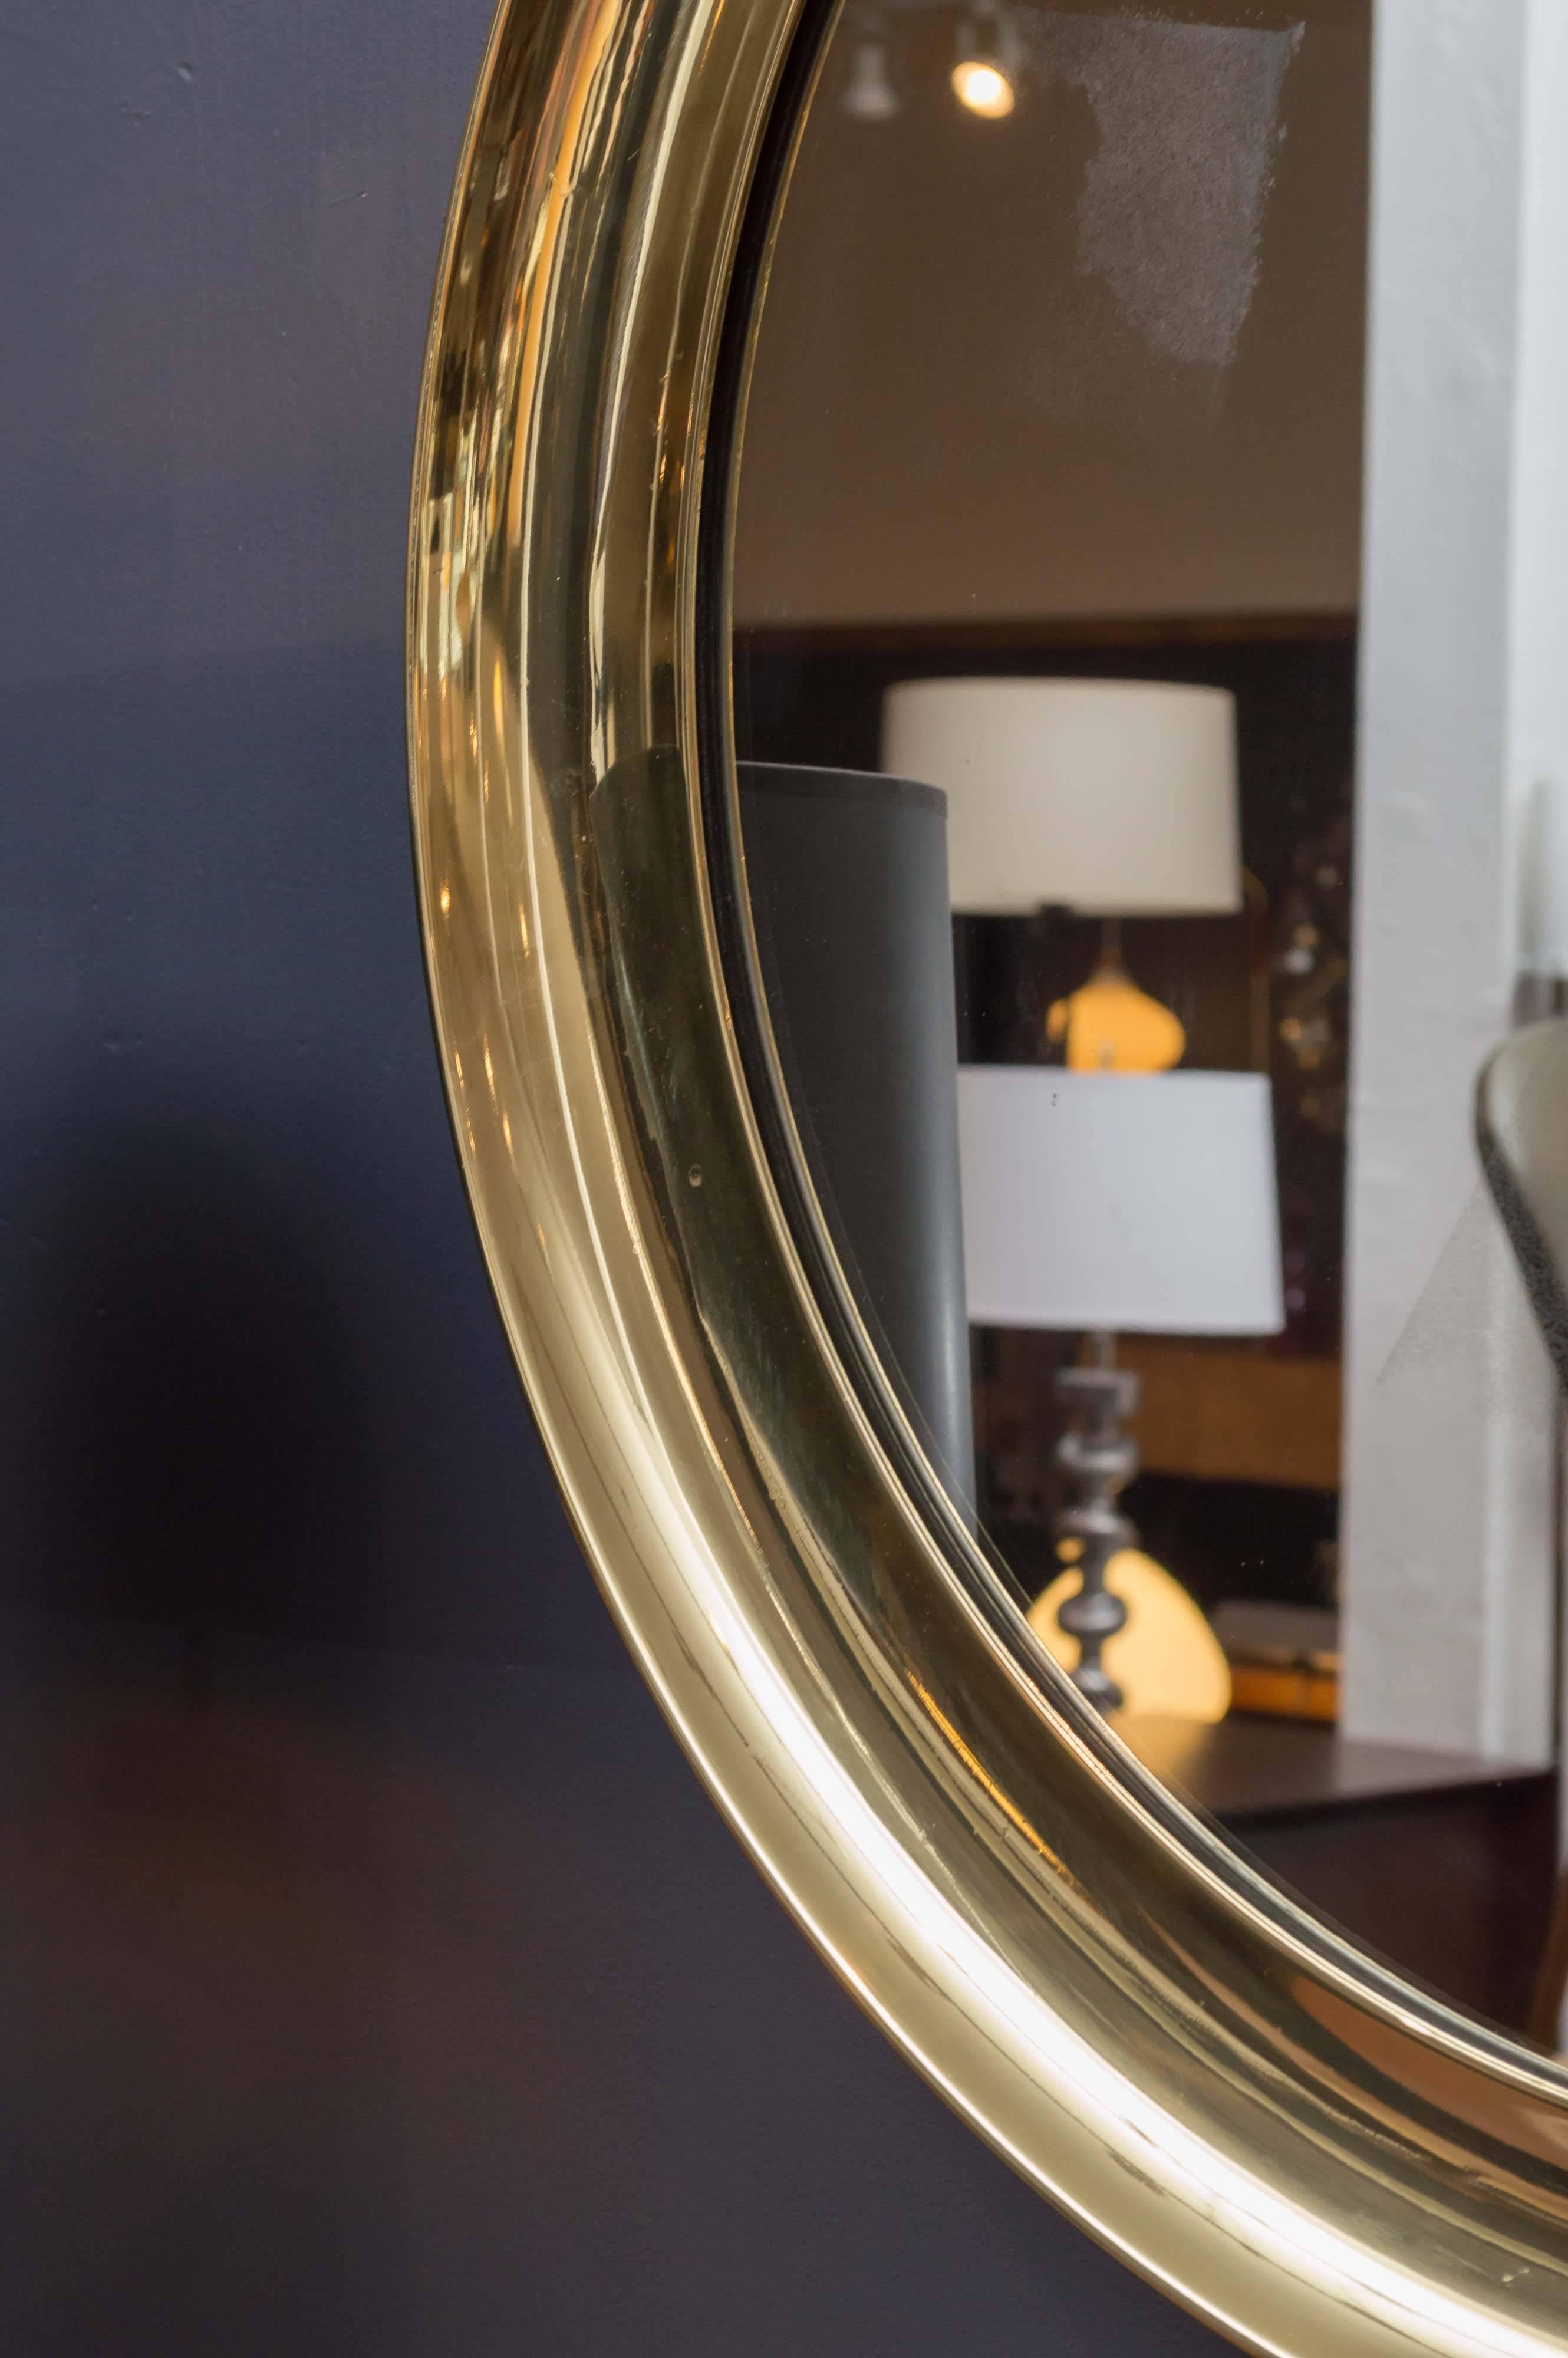 Large Italian brass port hole wall mirror, concave frame has been professionally polished. Original mirror plate has slight oxidation but not distracting and can be easily replaced.